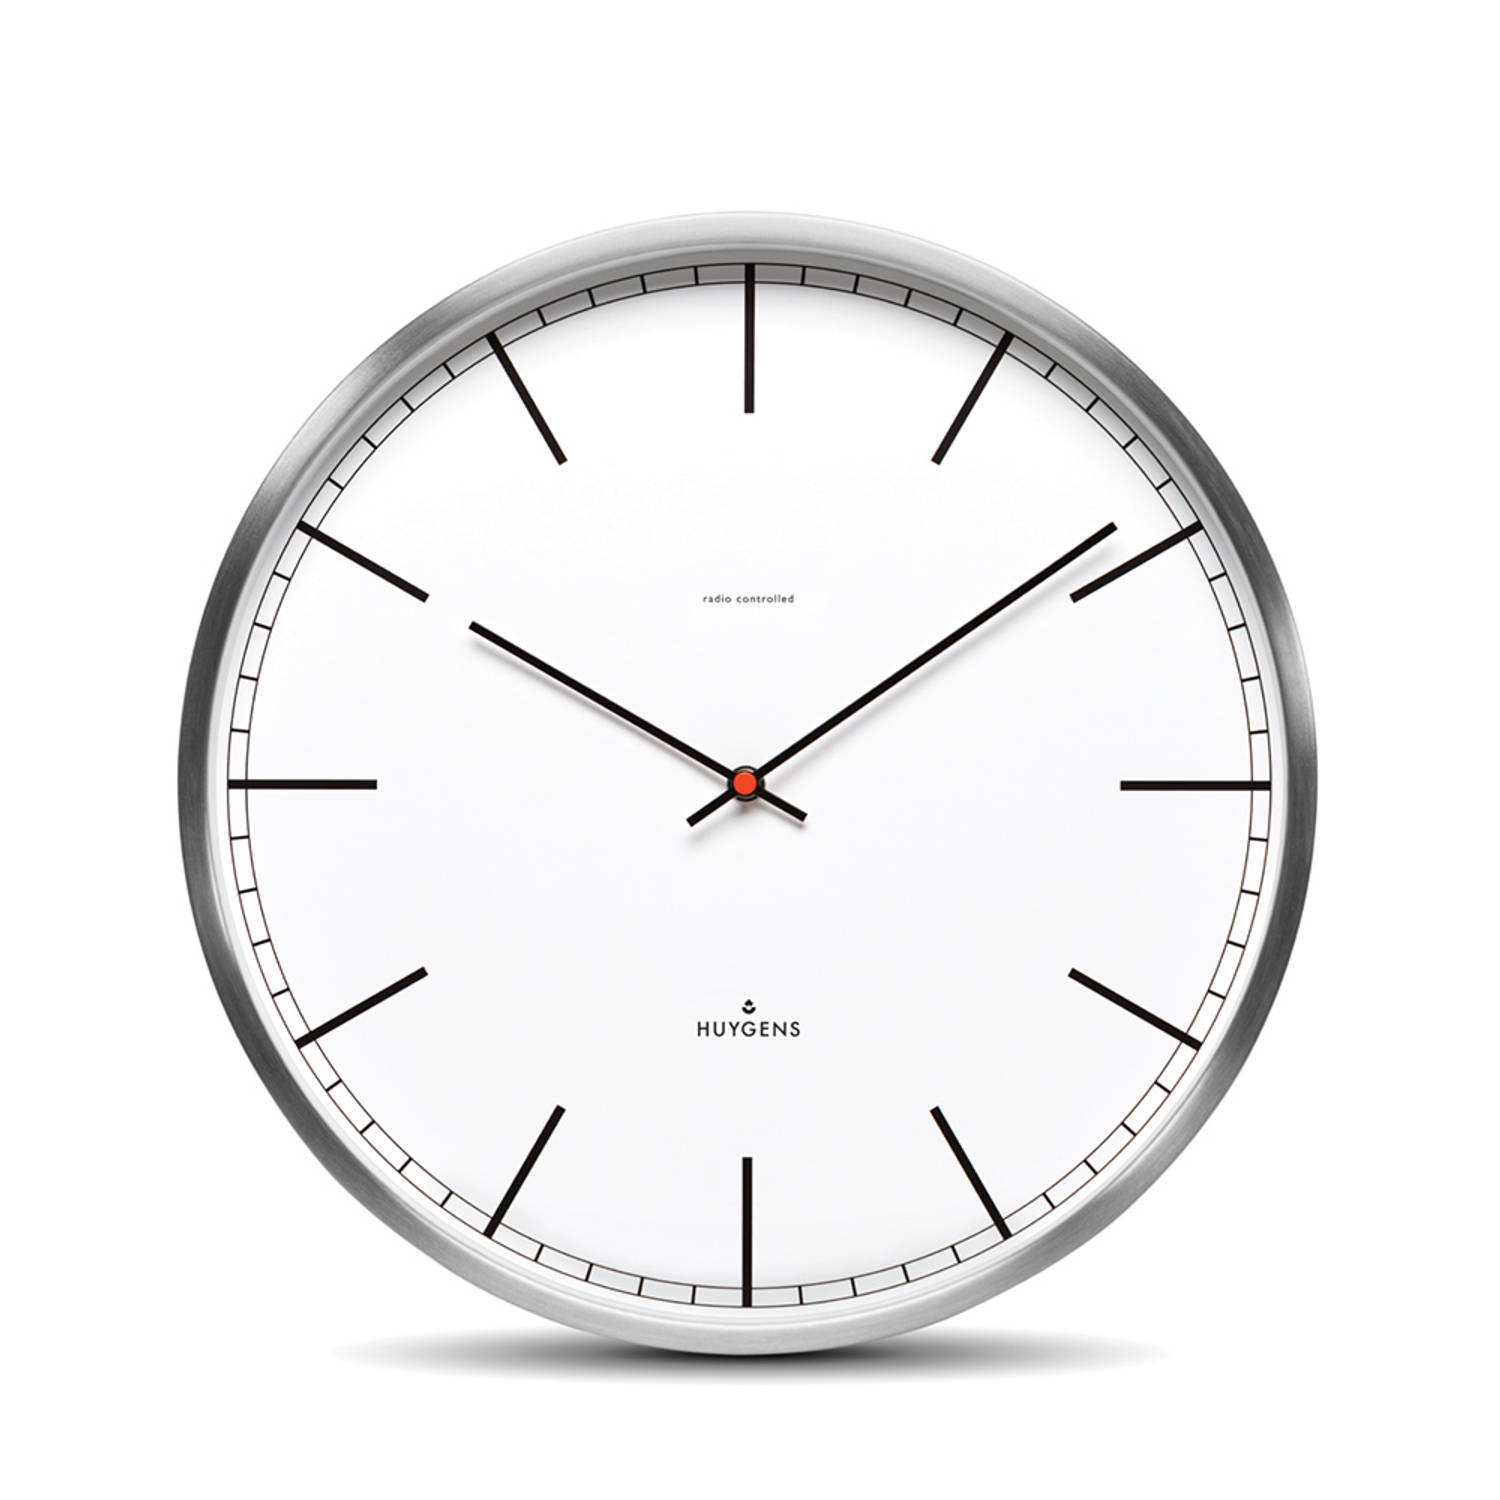 Huygens wall clock one35 stainless steel white index RC EU